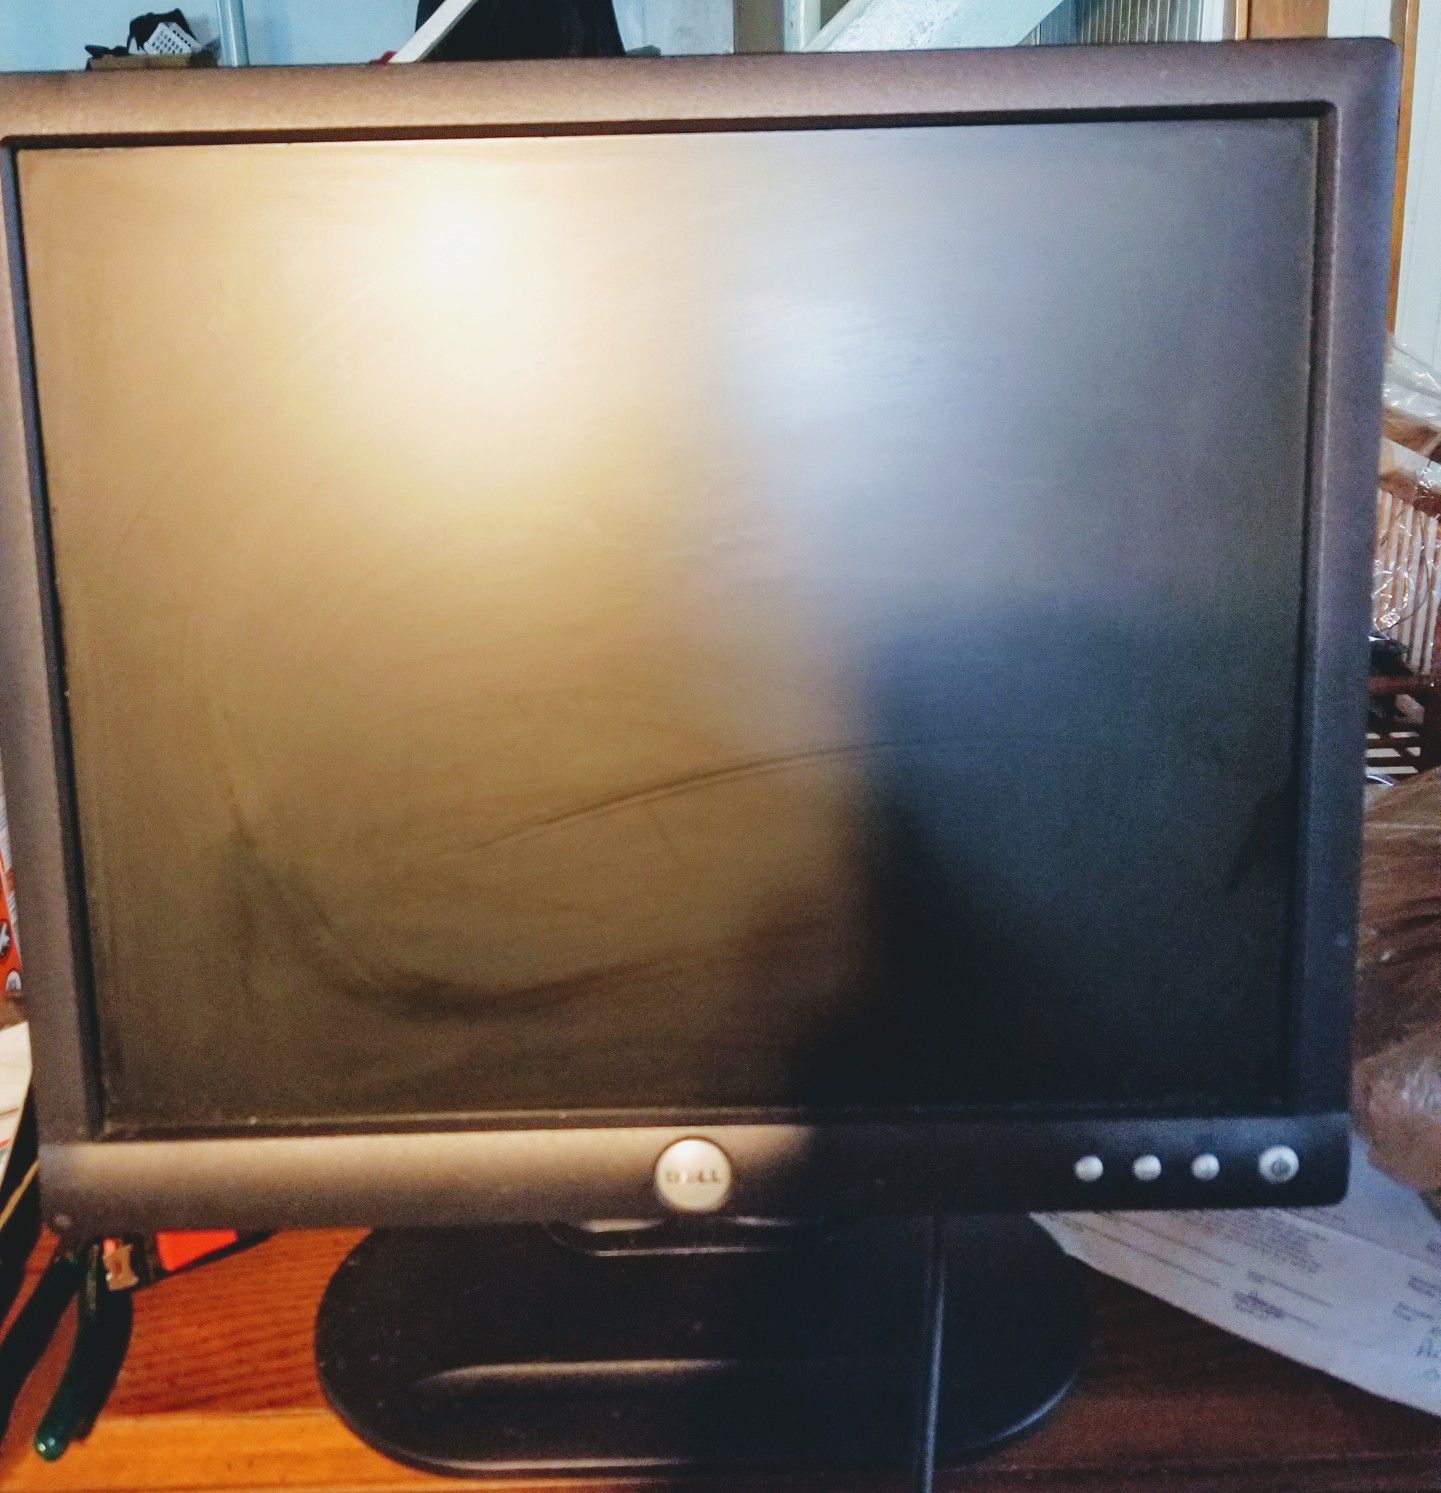 Monitor, and new keboard for computer